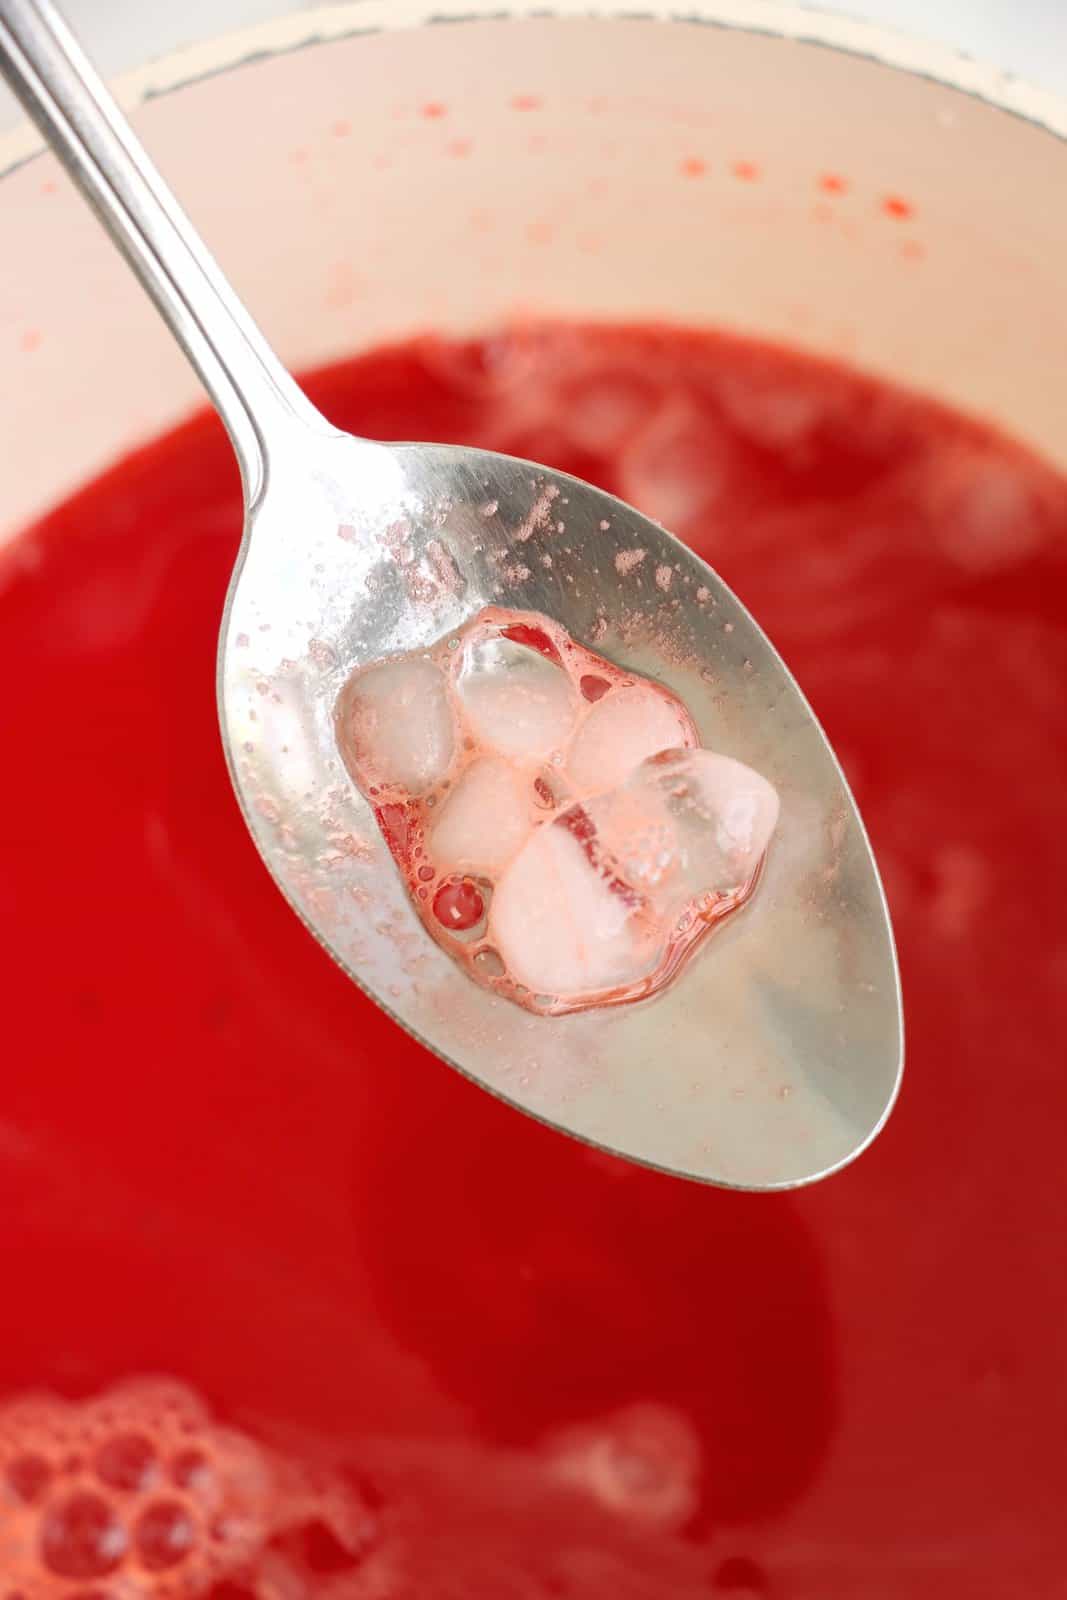 A spoon removing ice from a bowl of liquid gelatin.